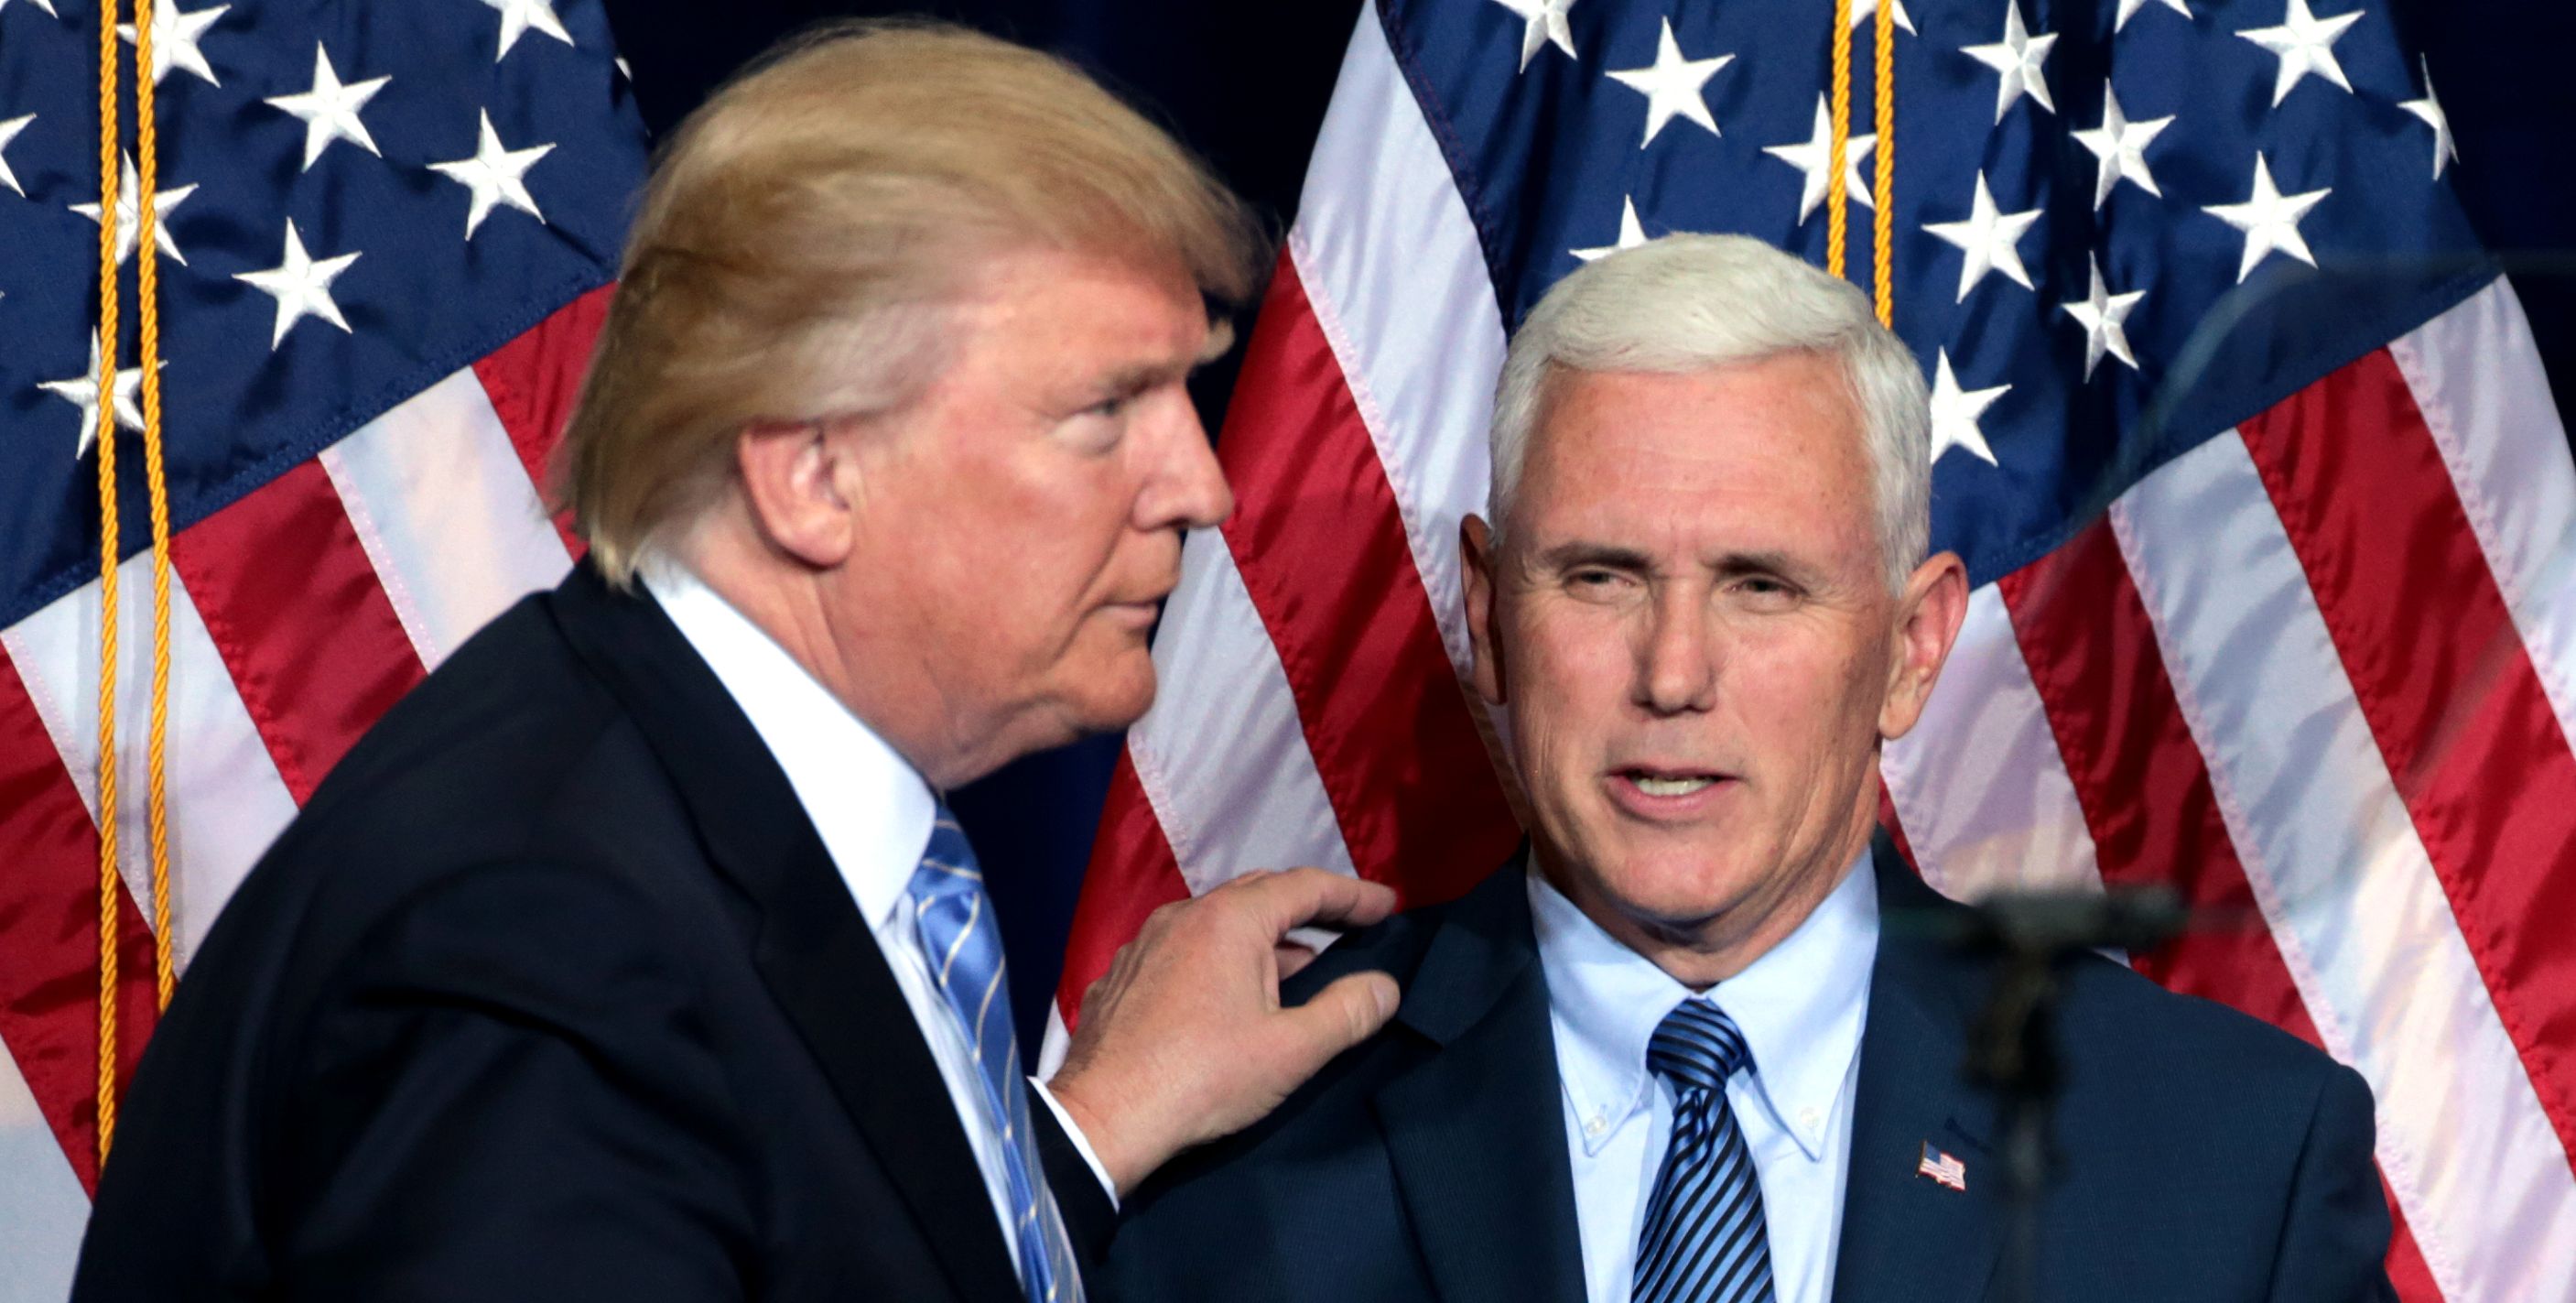 Former President Donald Trump, former Vice President Mike Pence stand together.